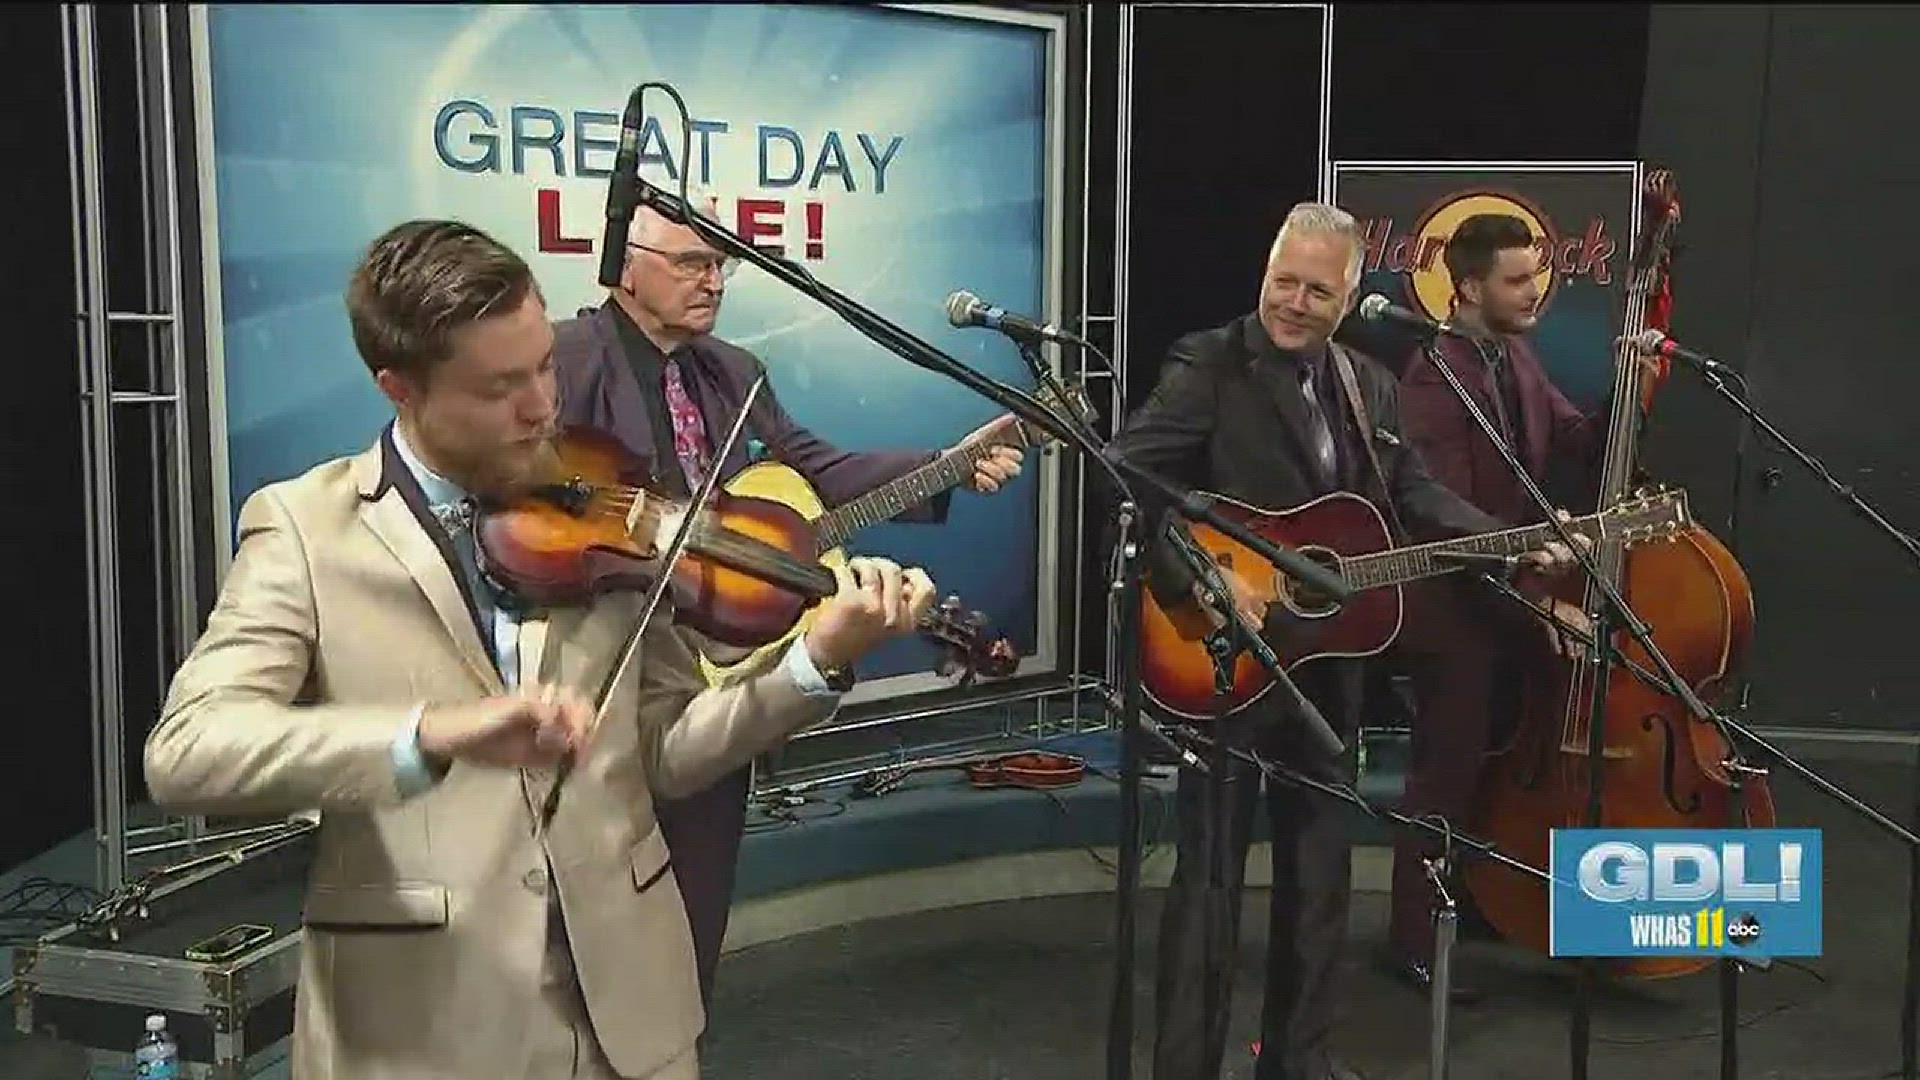 "Brew-grass" is bluegrass music that run through the instruments of Gary Brewer and the Kentucky Ramblers. The local family band is made up of Gary Brewer, his sons Wayne and Mason, his dad Finley, and a banjo and fiddler.